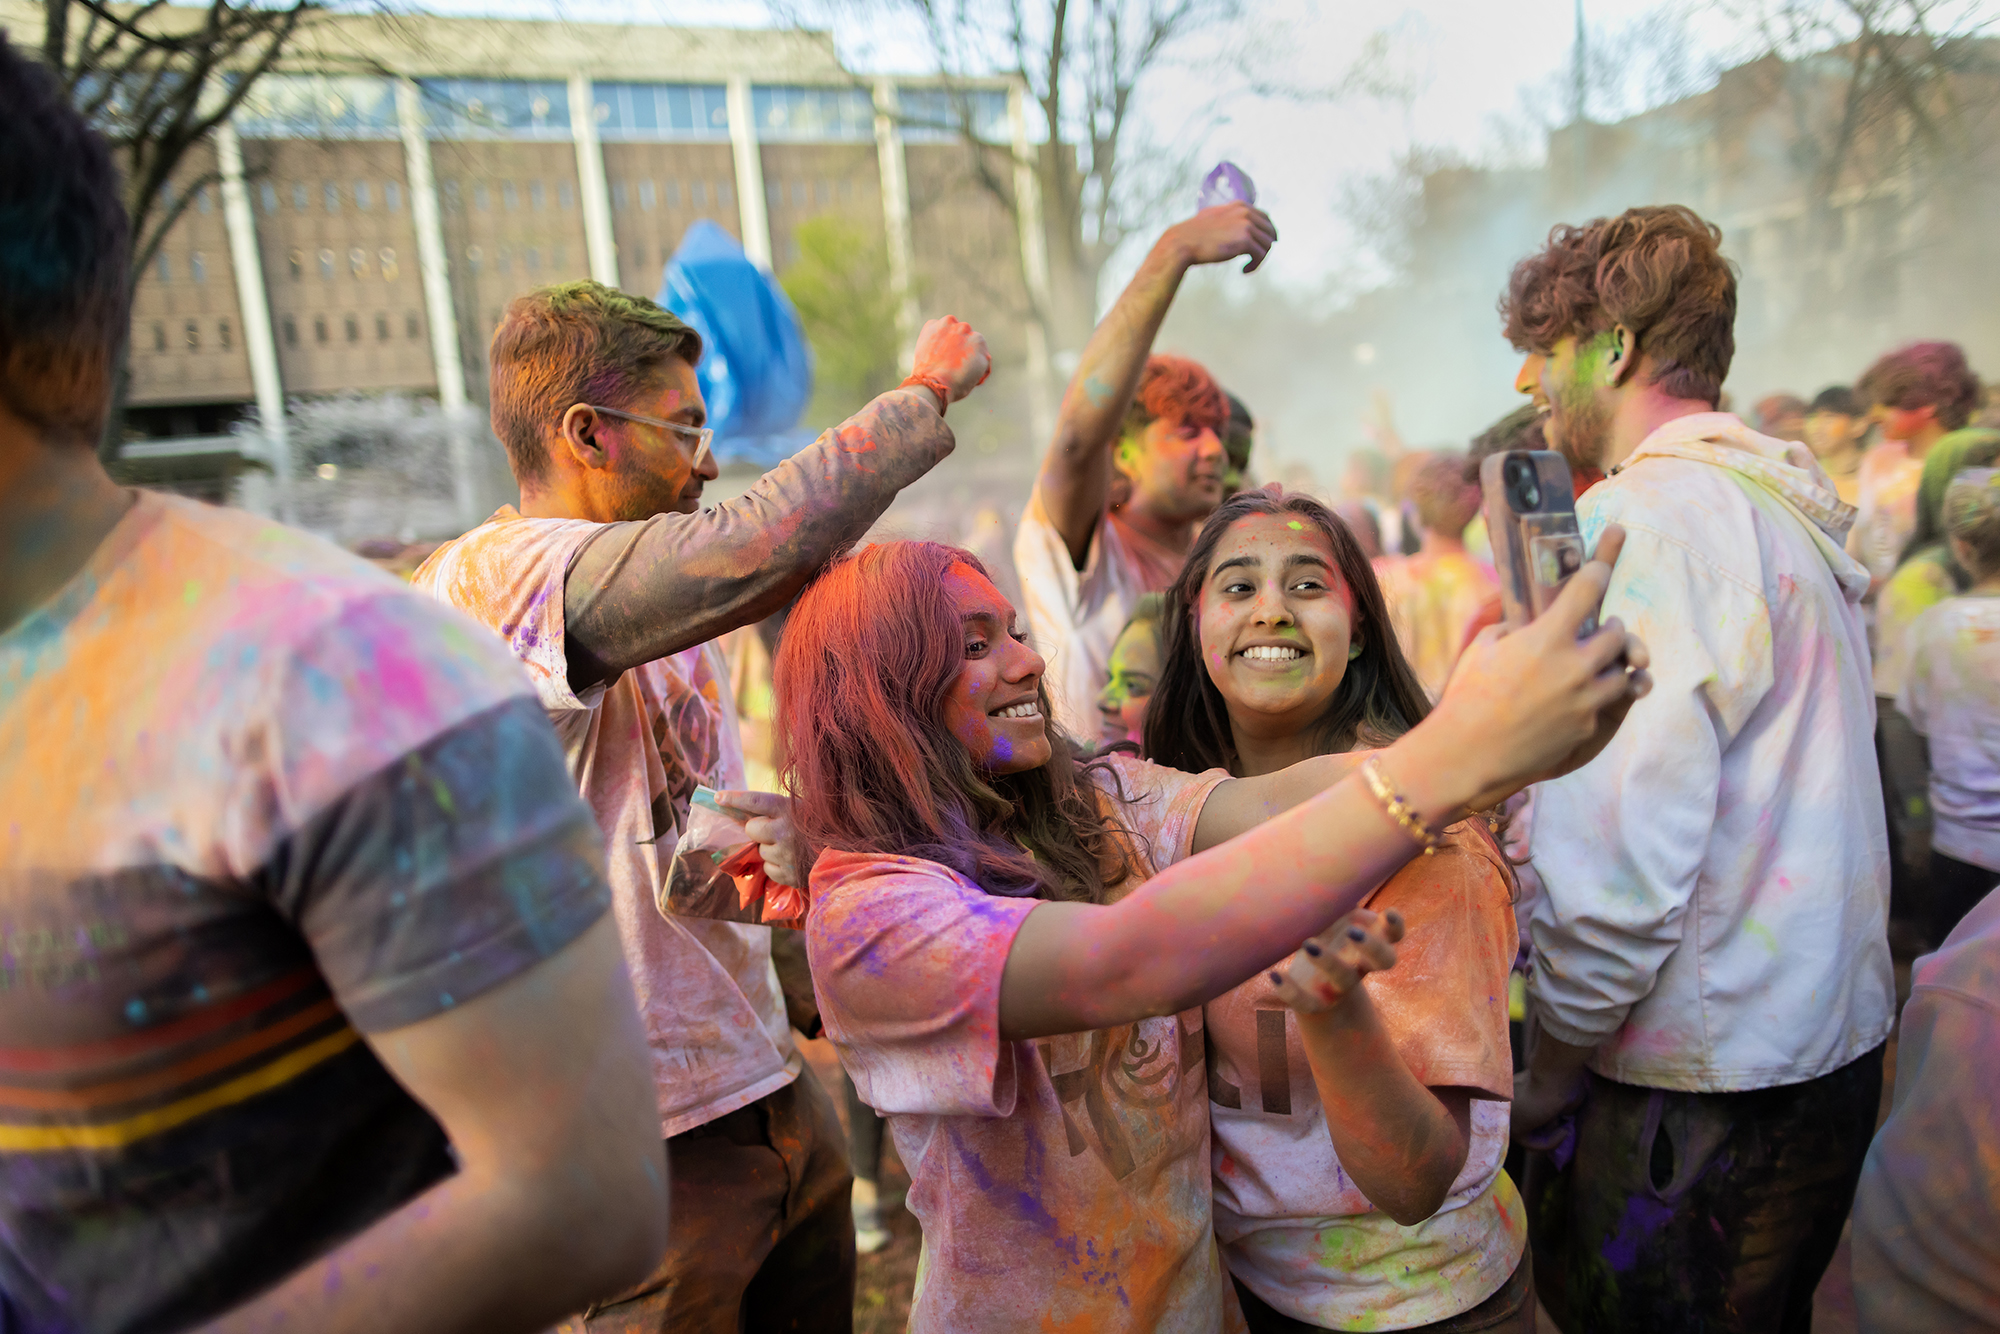 Students pose for a selfie while covered in powder while celebrating Holi on College Green.